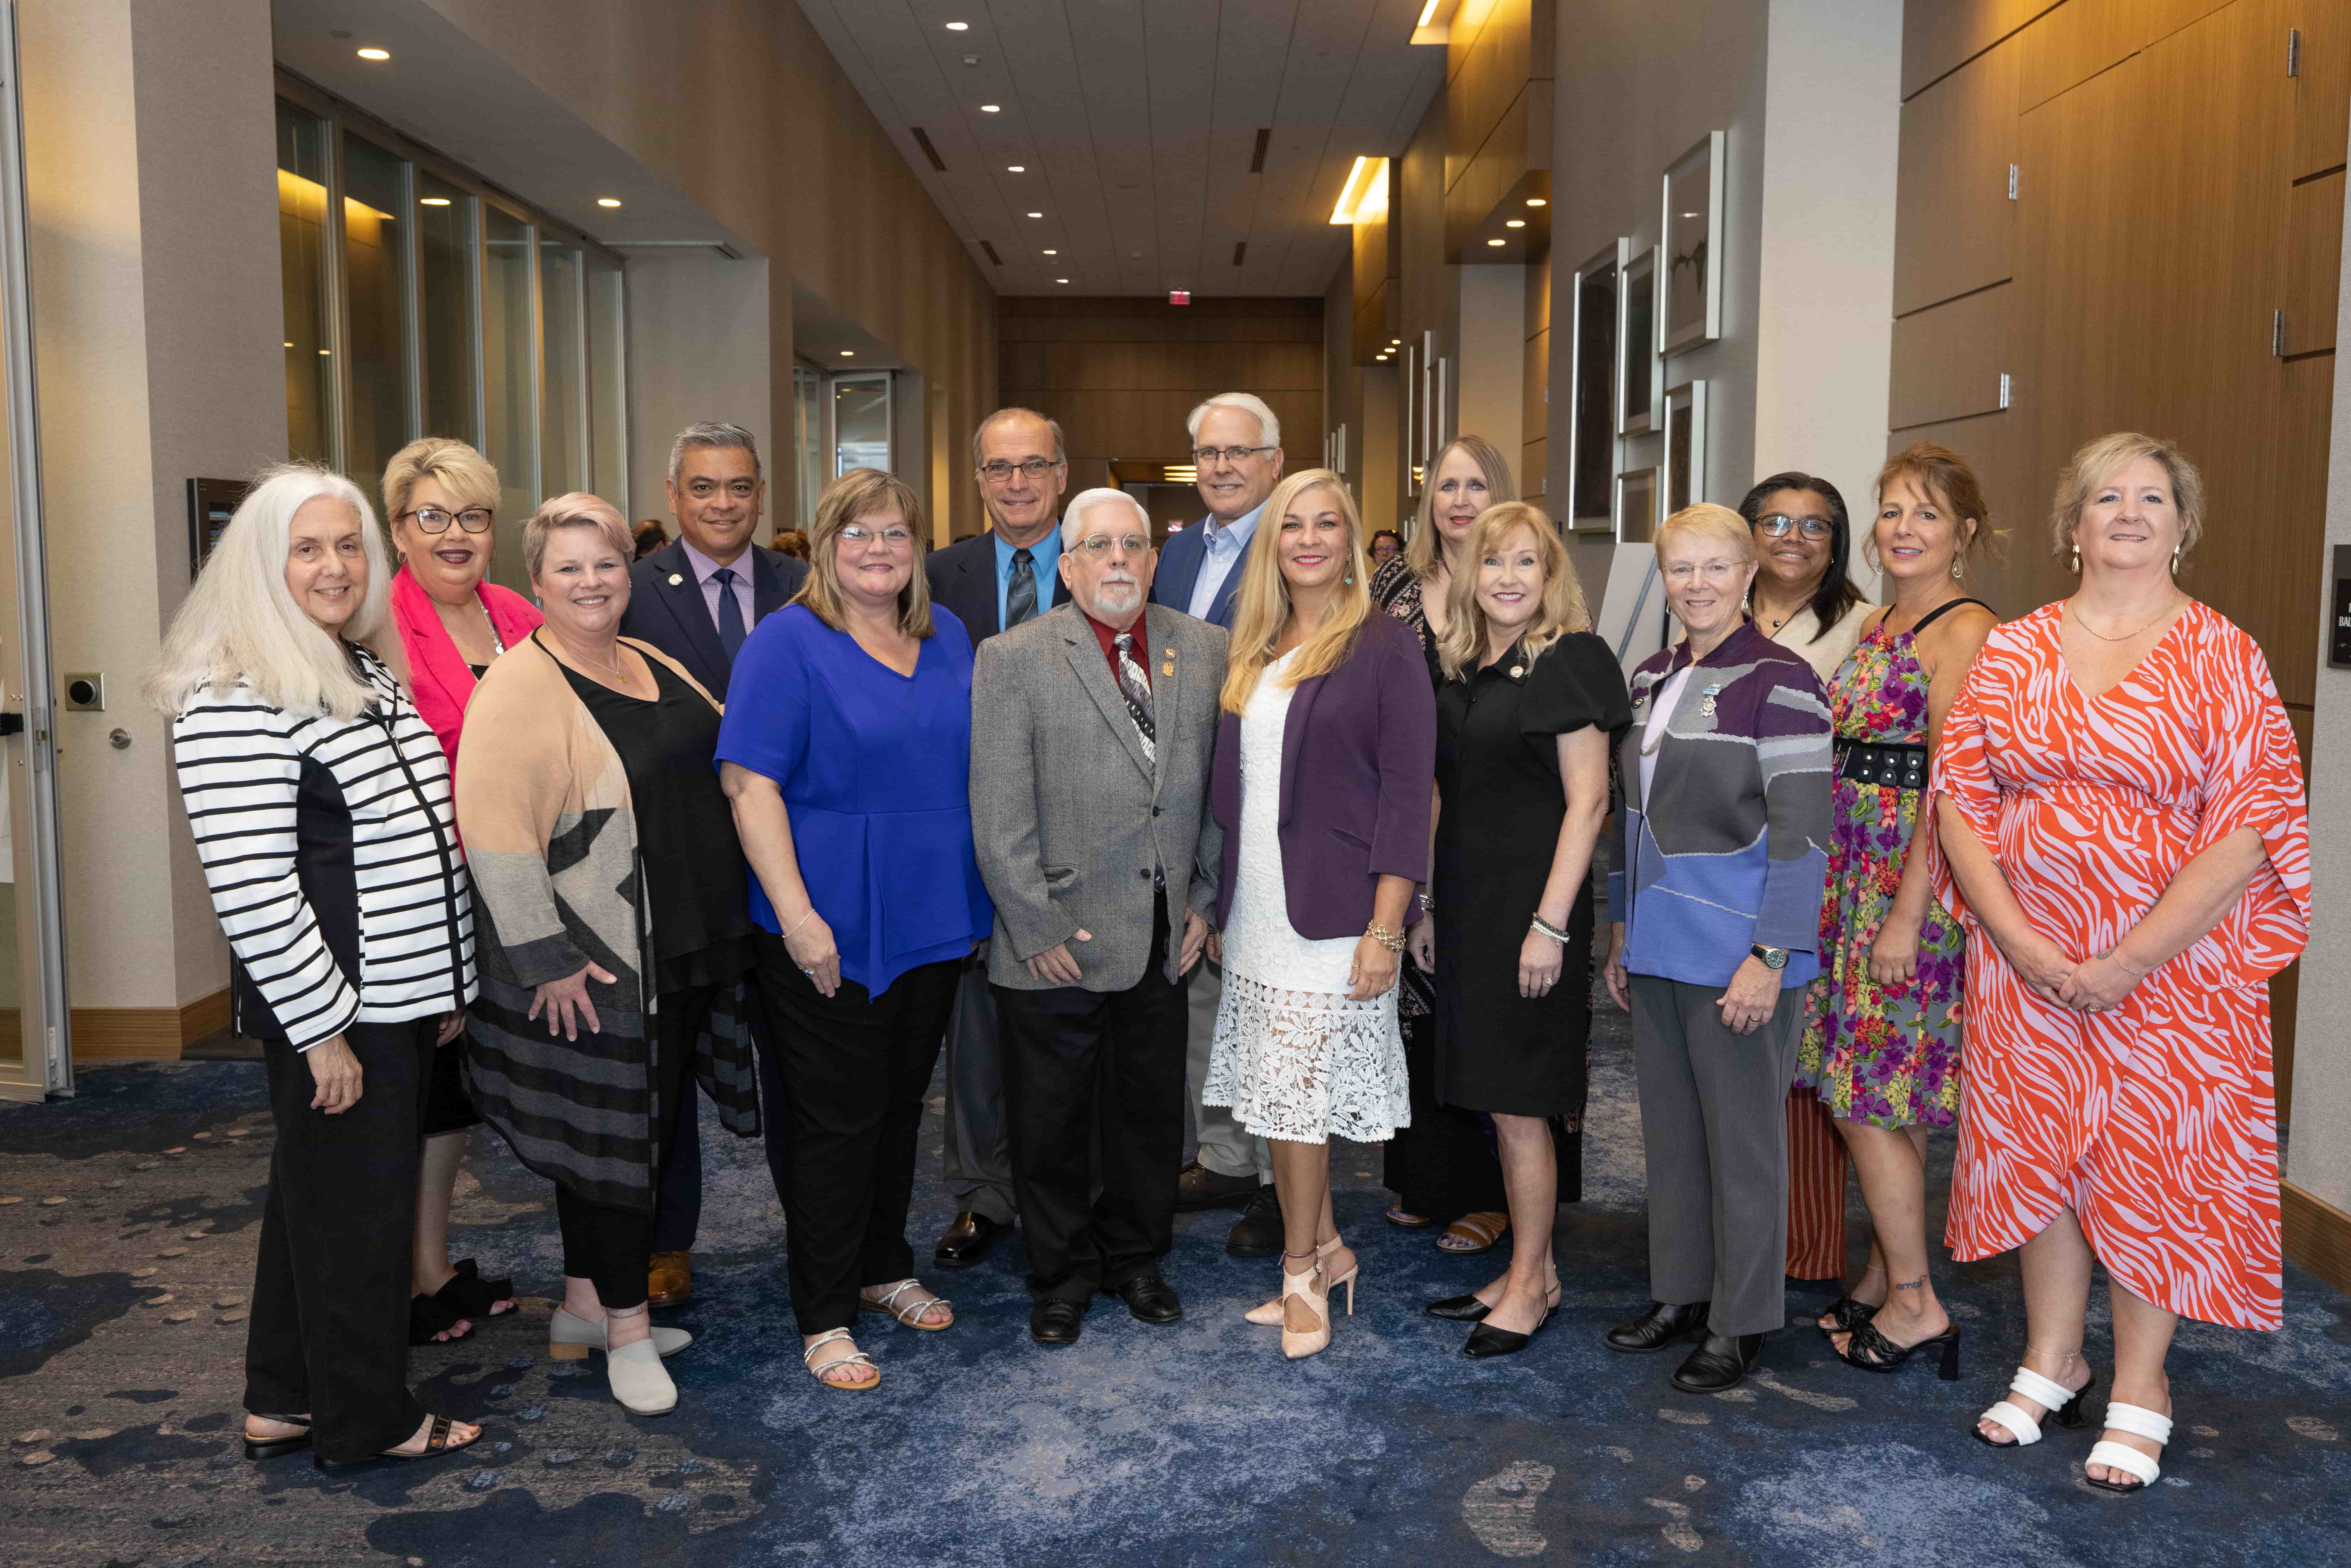 The 2022-2023 AMTA Board of Directors and Standing Committee Chairs enjoyed being together for the AMTA 2022 National Convention.